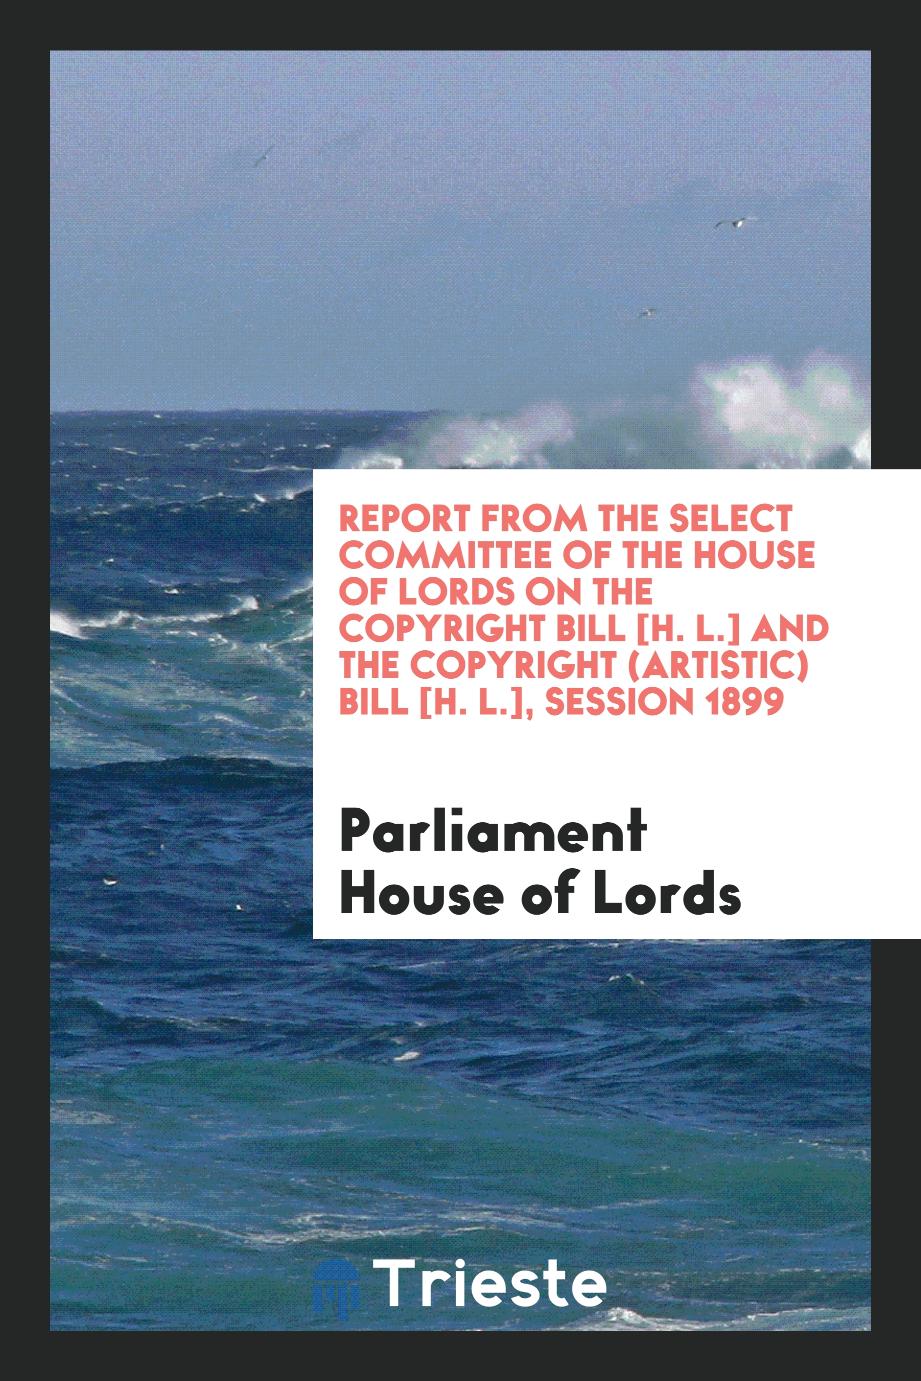 Report from the Select Committee of the House of Lords on the Copyright Bill [H. L.] and the Copyright (Artistic) Bill [H. L.], Session 1899